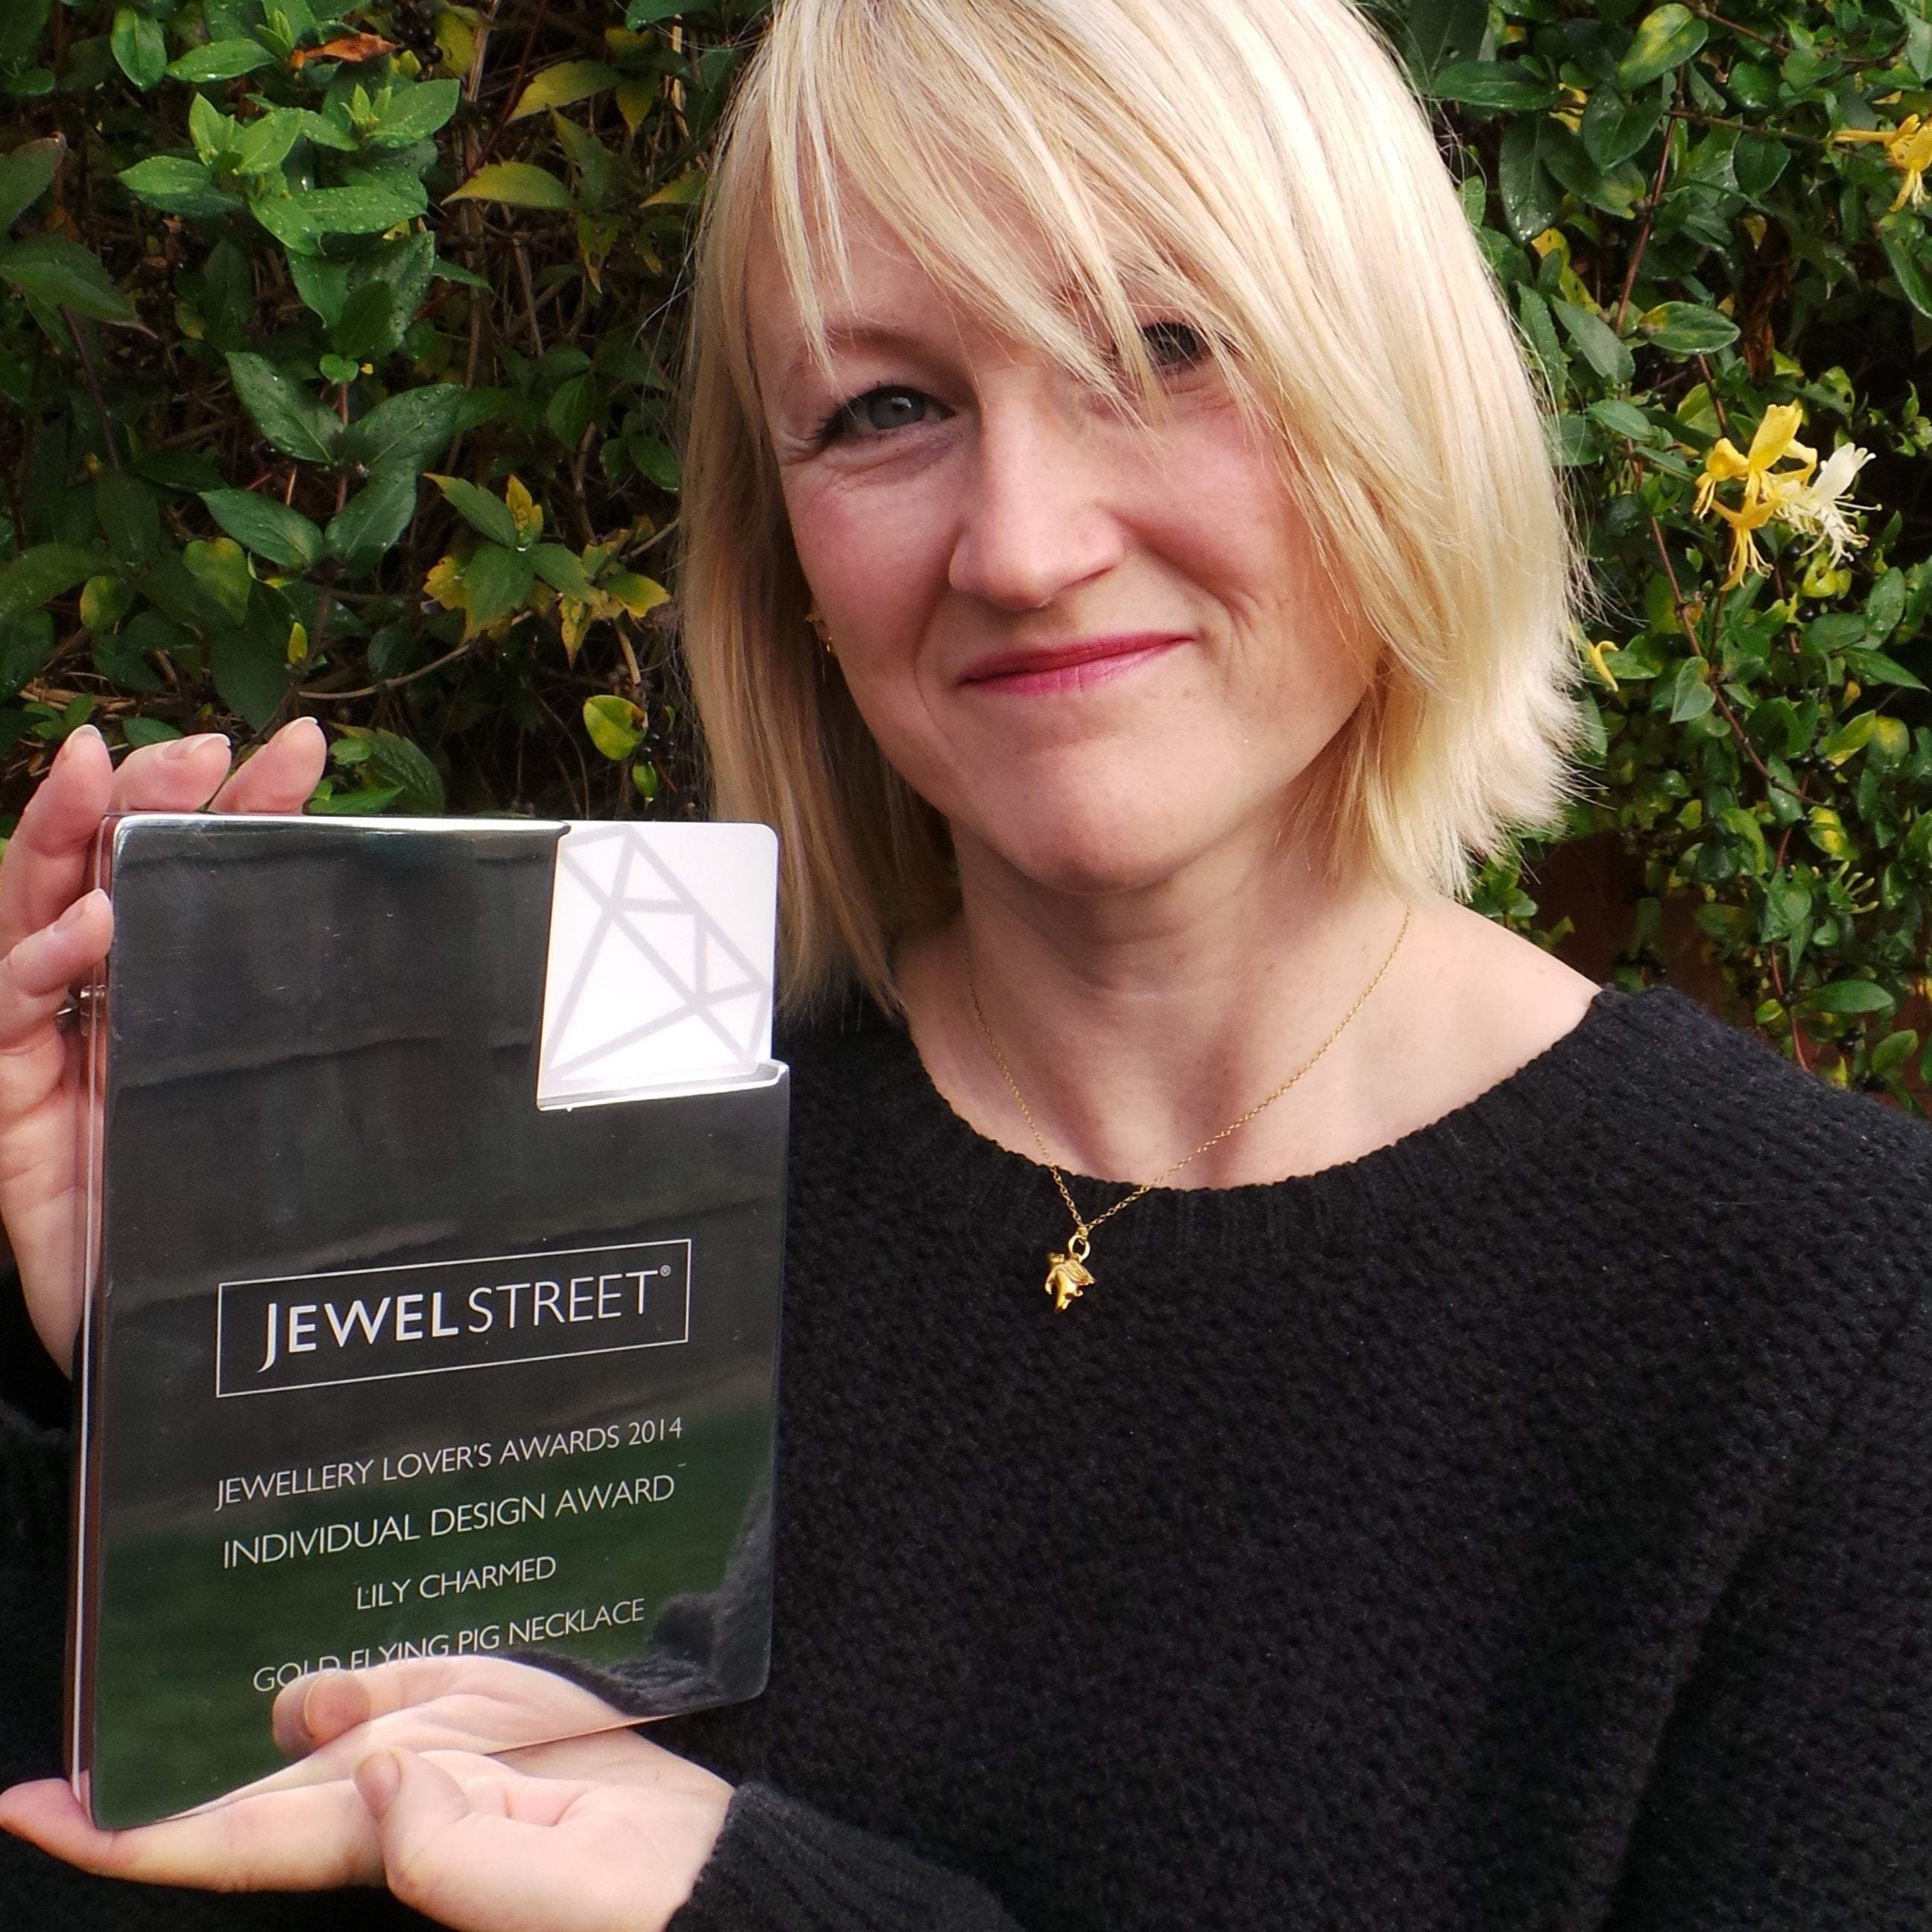 Lily Charmed - Wins Jewellery Design Awards 2014